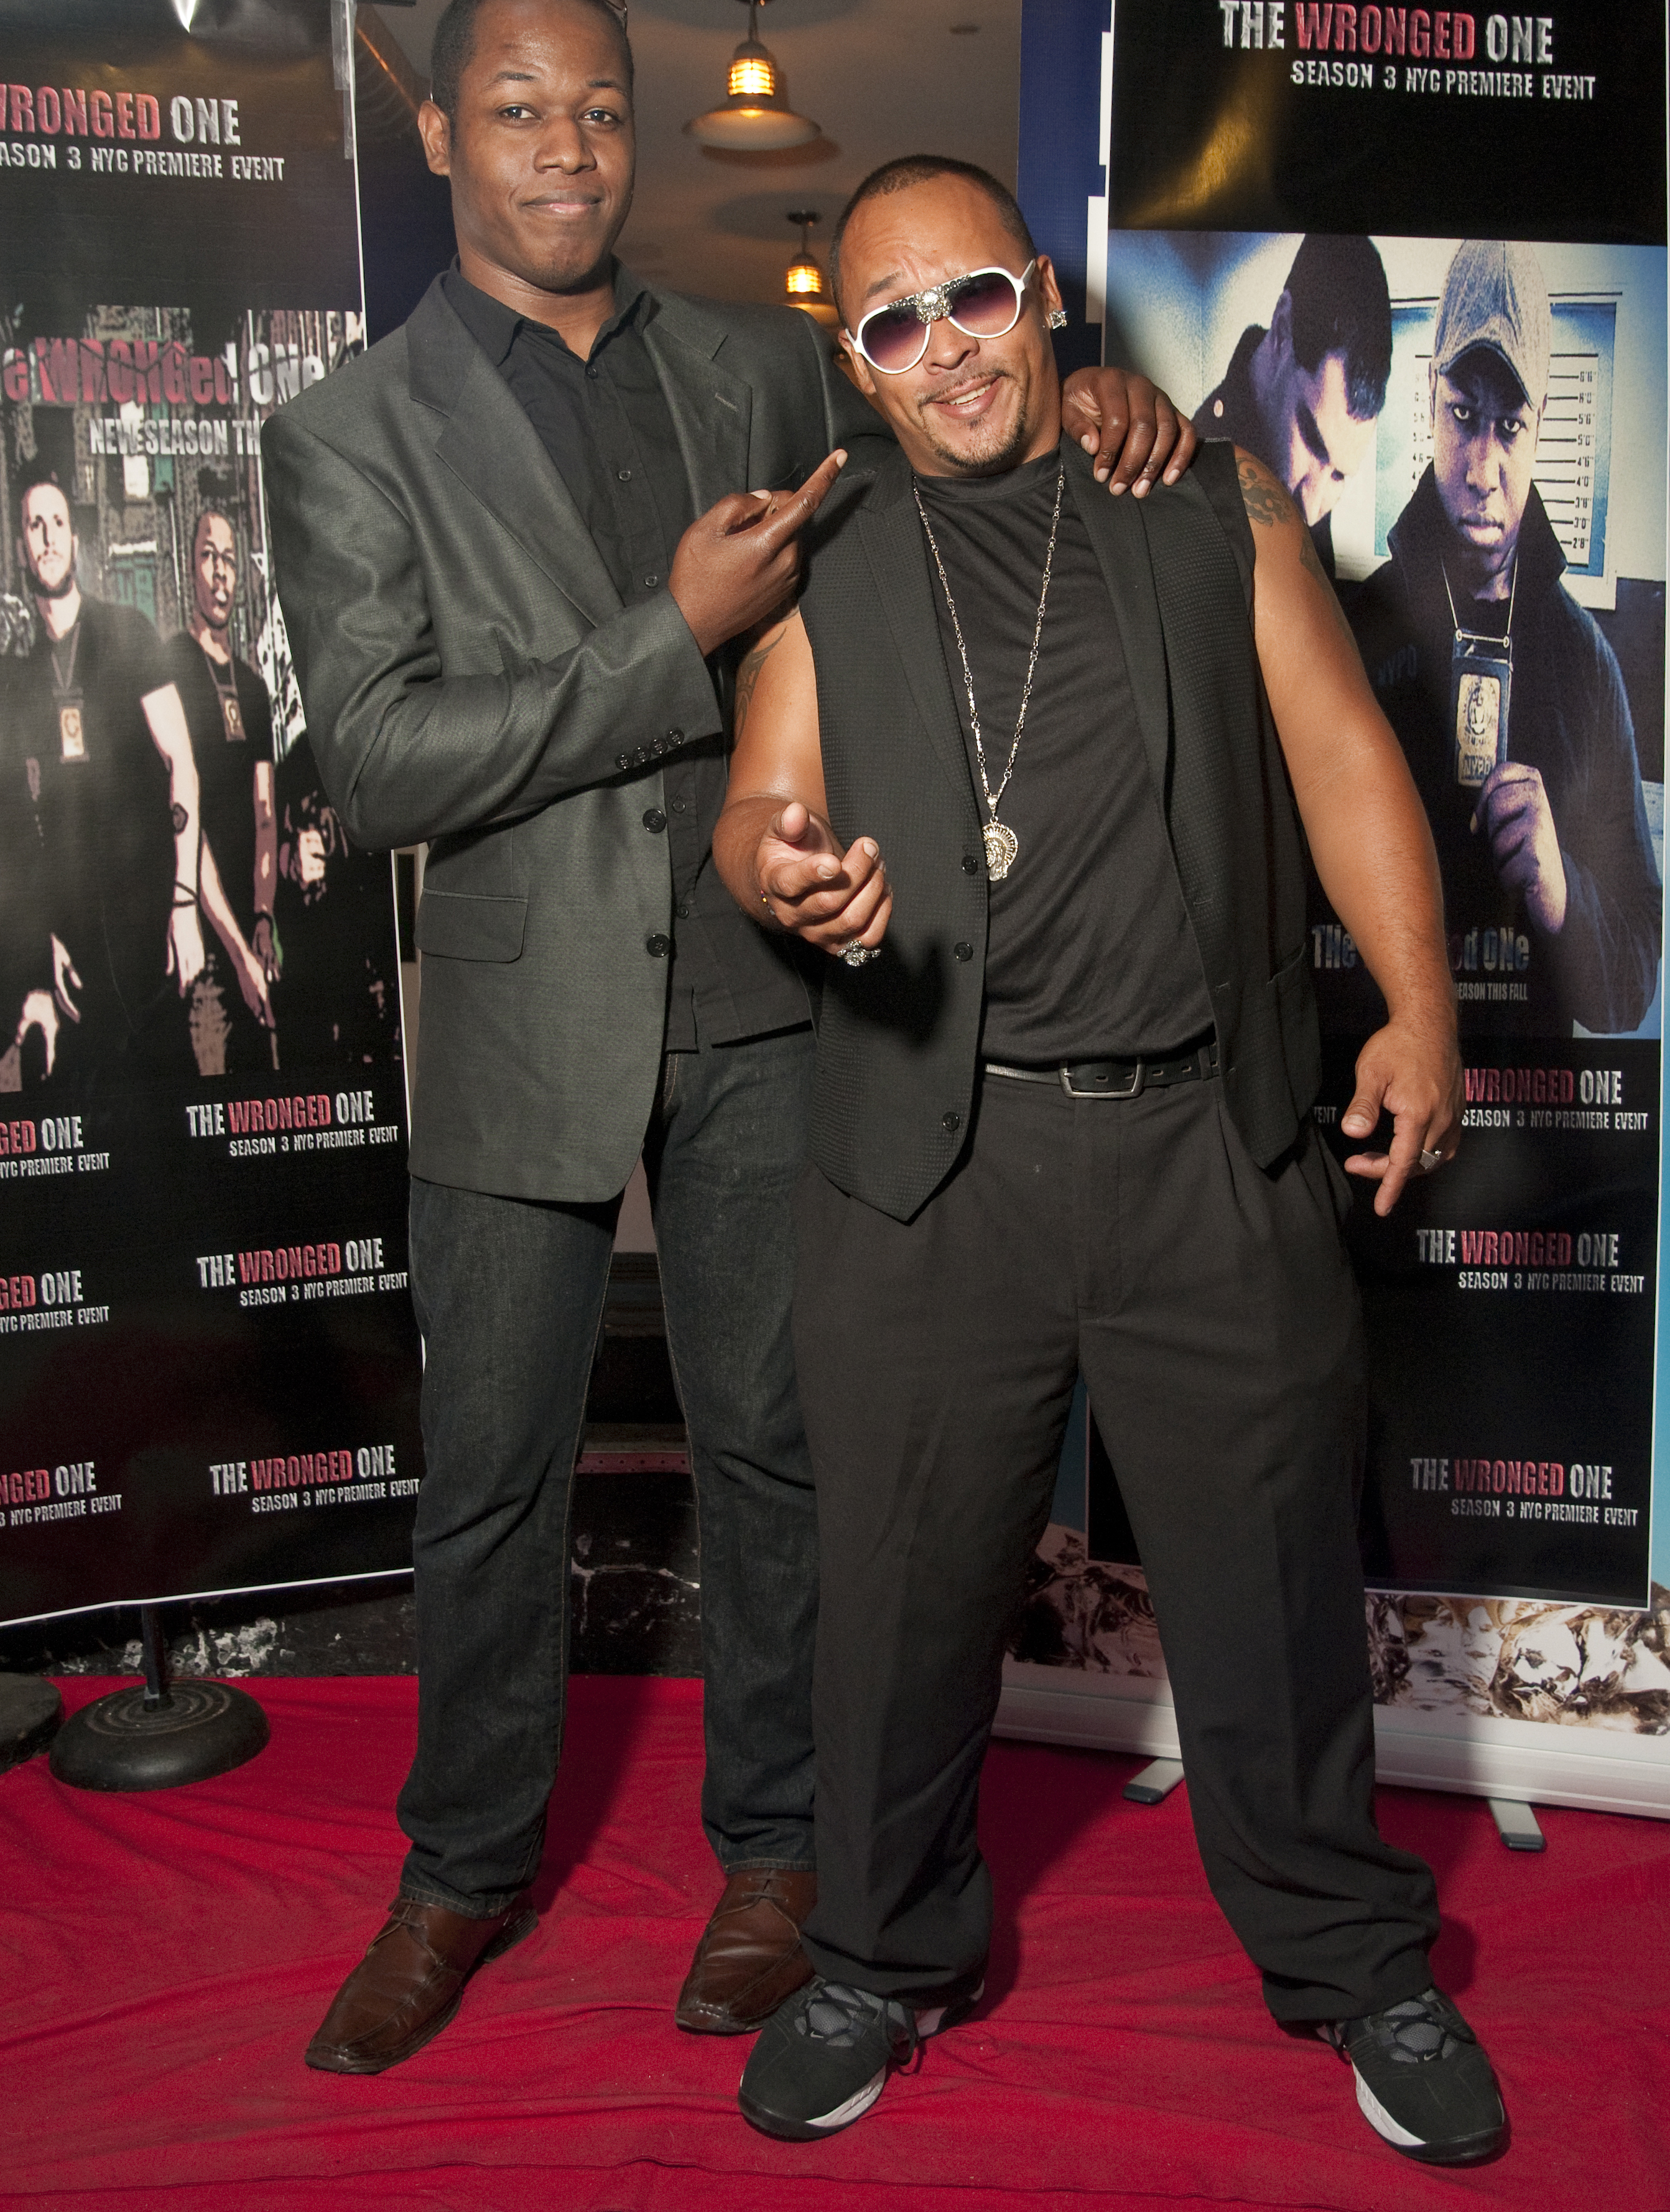 Bruce Wabbit and Irving Diaz at The Wronged One New York premiere.